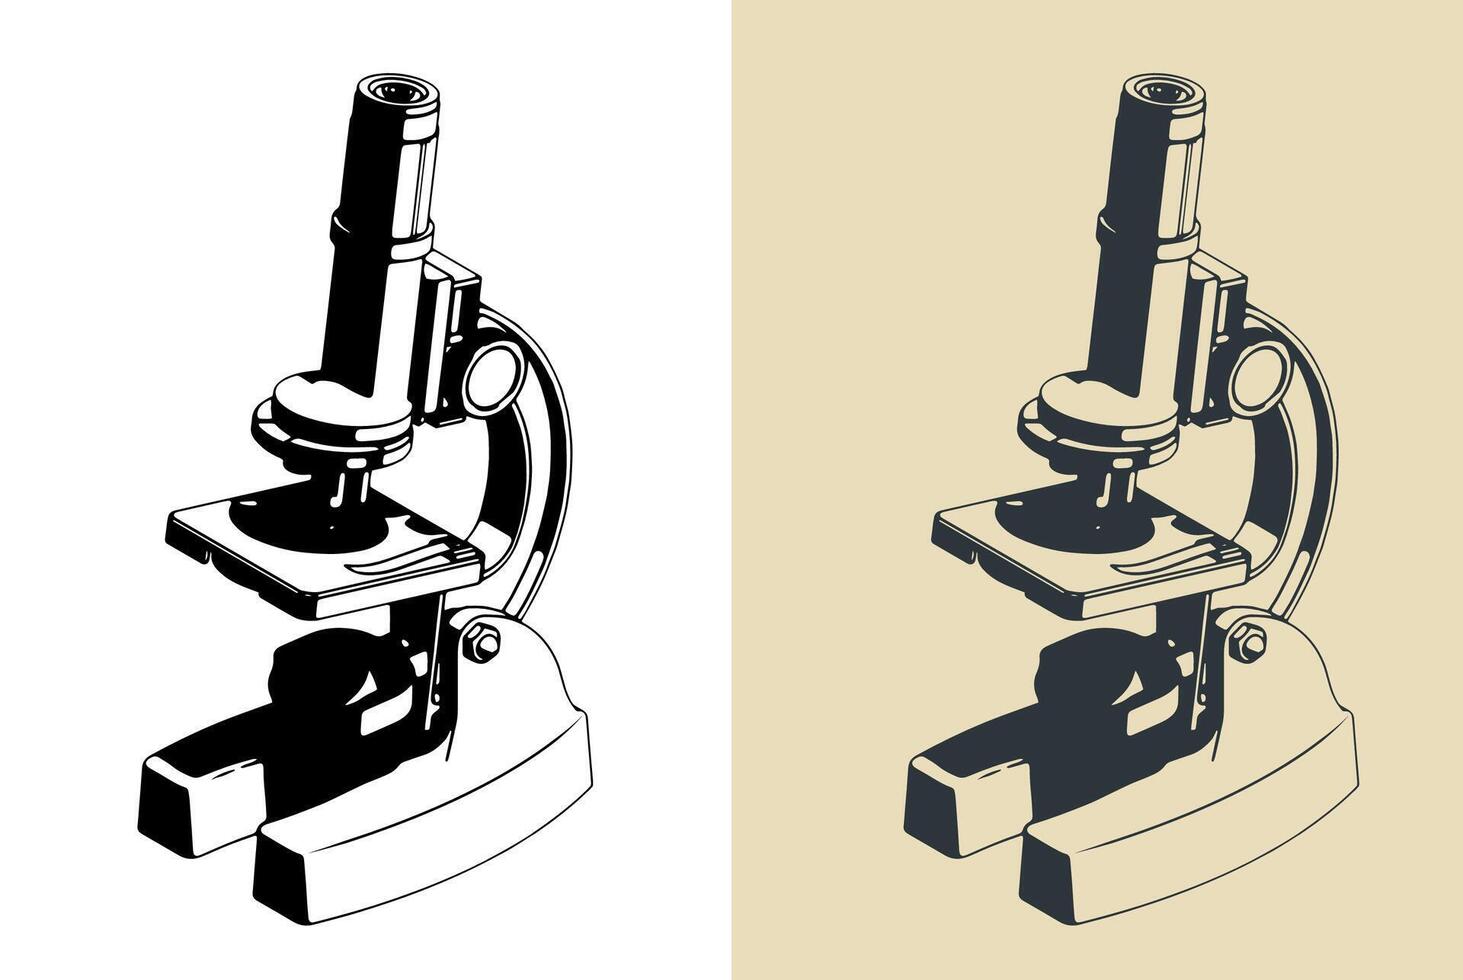 Stylized illustrations of microscope vector